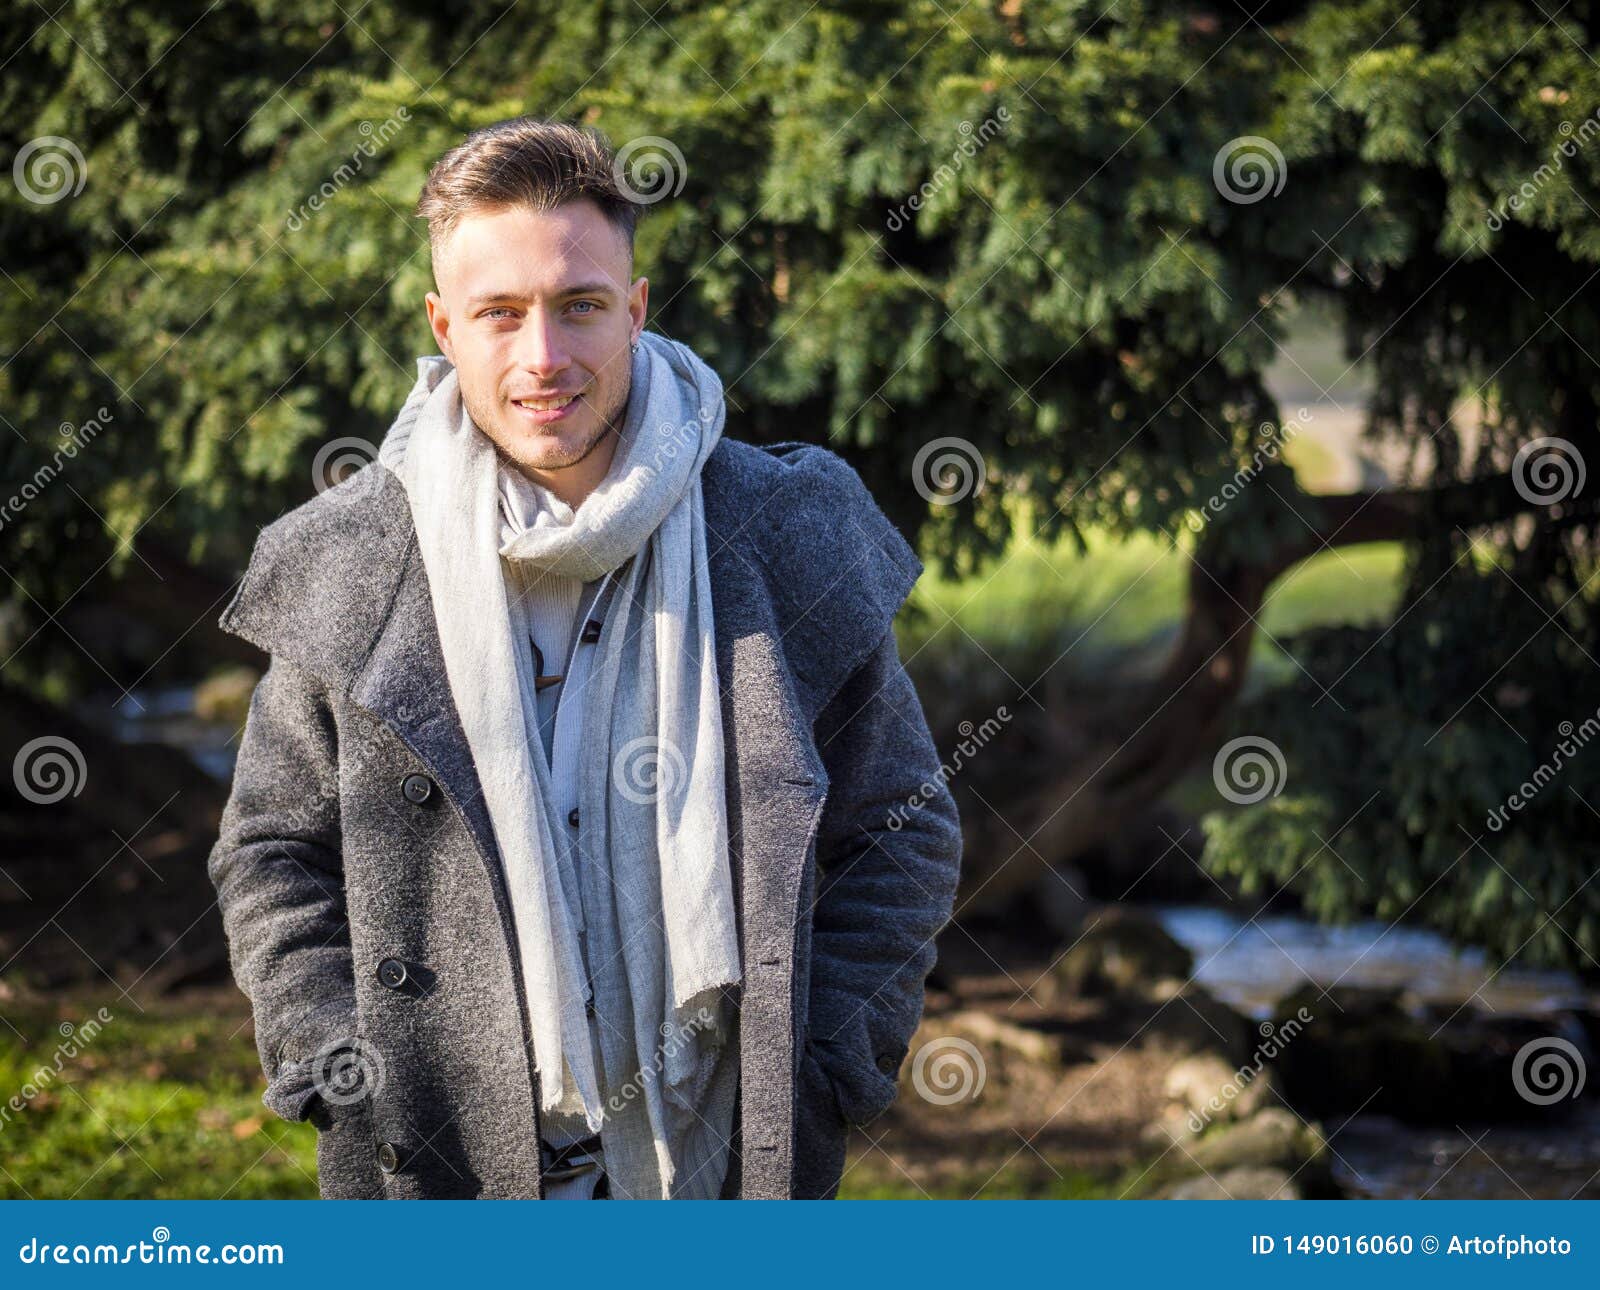 Handsome Trendy Young Man, Walking in City Park Stock Photo - Image of ...